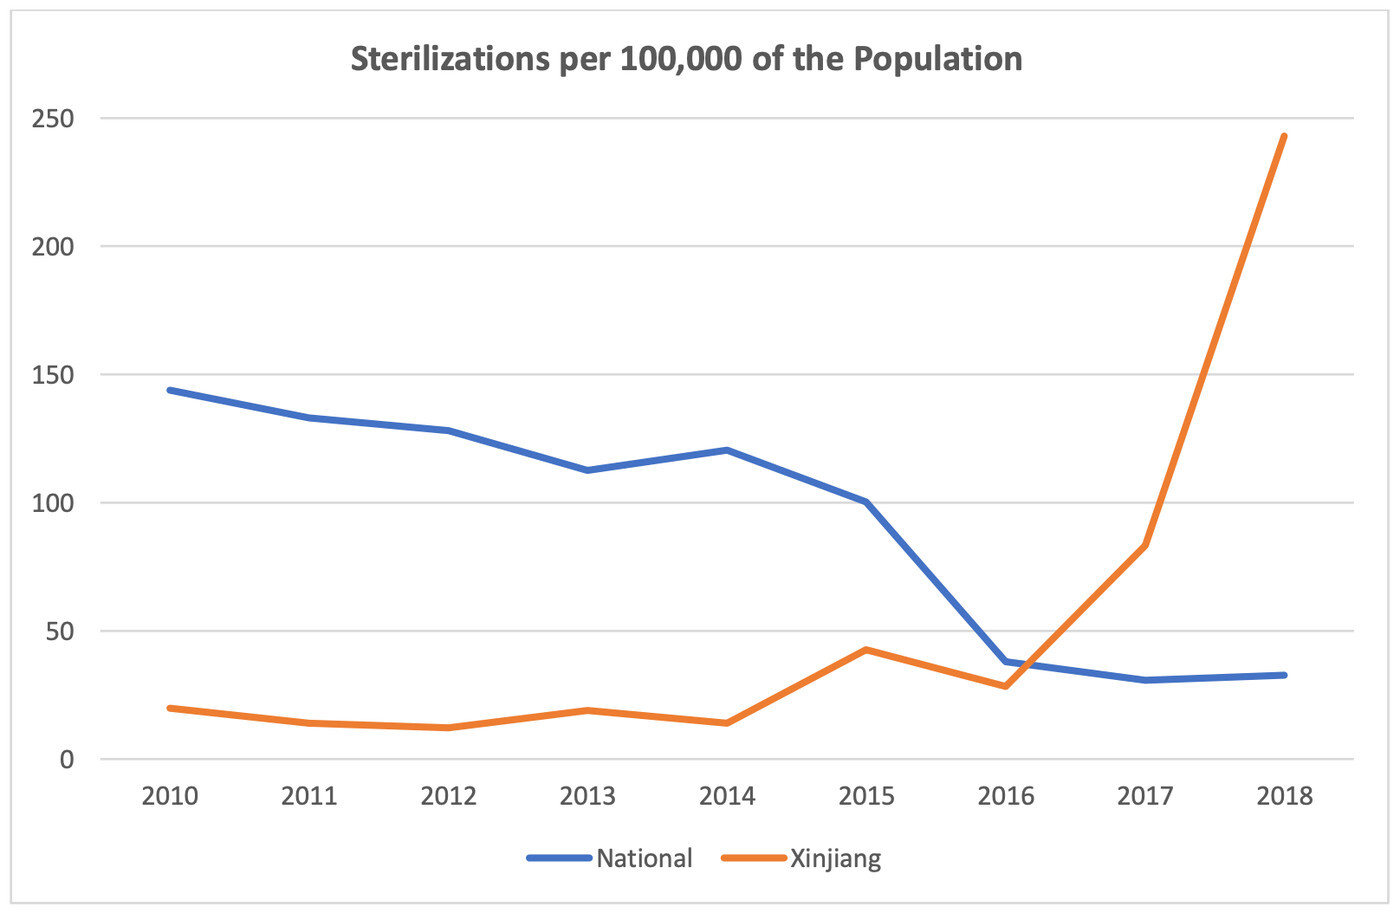 Chart compiled using data from China’s Health and Hygiene Statistical Yearbooks. The y-axis shows the number of sterilisations per 100,000 people.